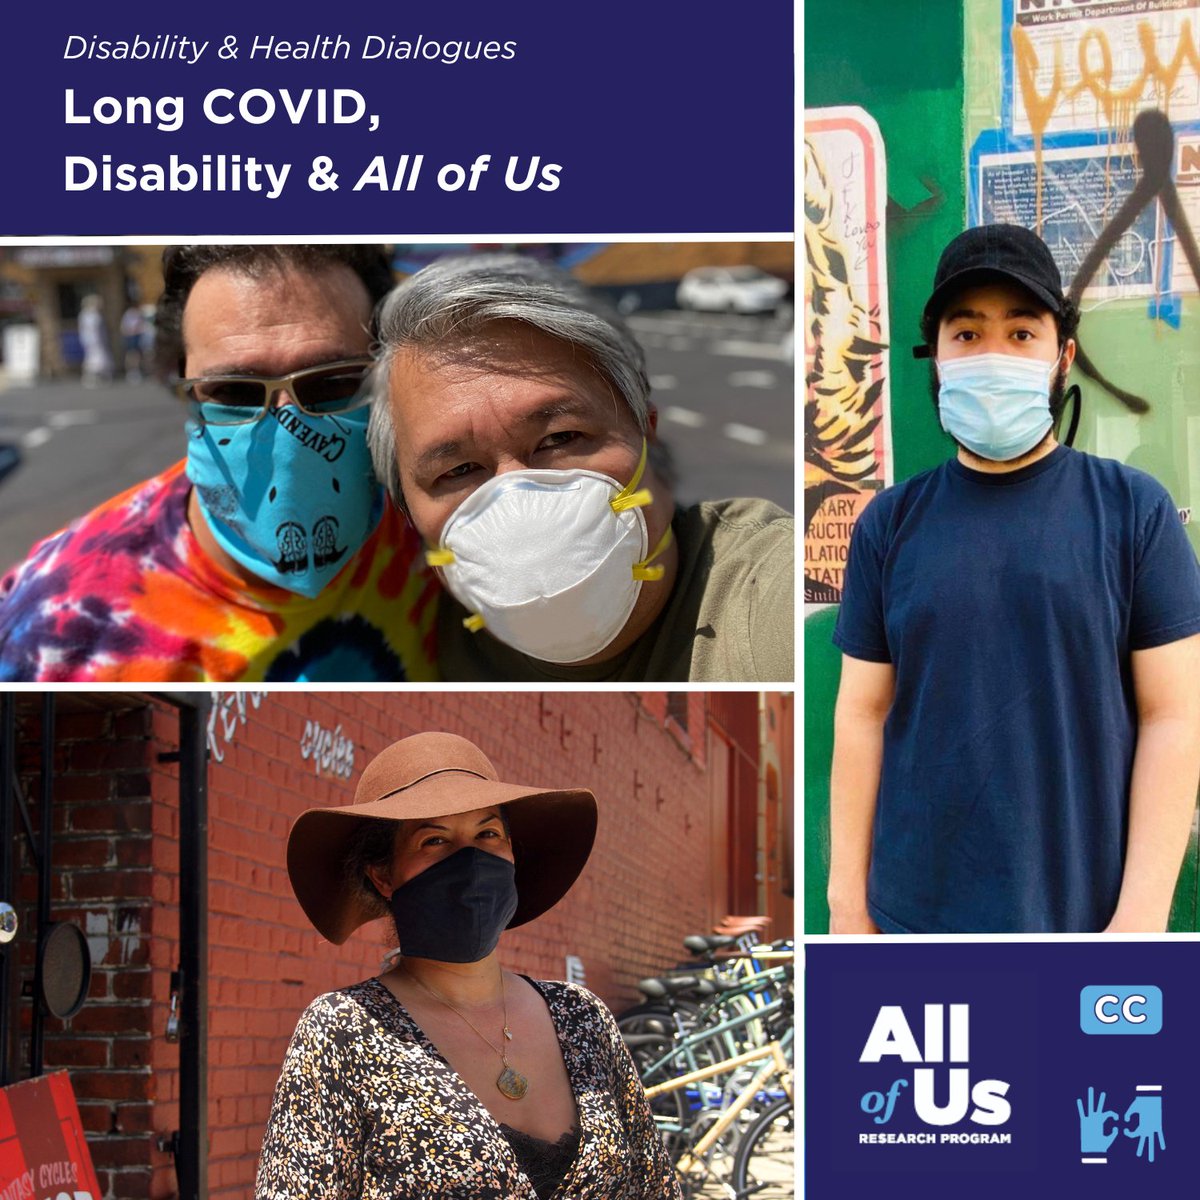 Can we develop #PrecisionMedicine for Long COVID? Join us April 30 at 2pm ET for a panel on #LongCOVID, Disability + @AllofUsResearch. Hear from patient advocates on the importance of inclusive health research to support people with Long COVID. Register: bit.ly/April30-Panel